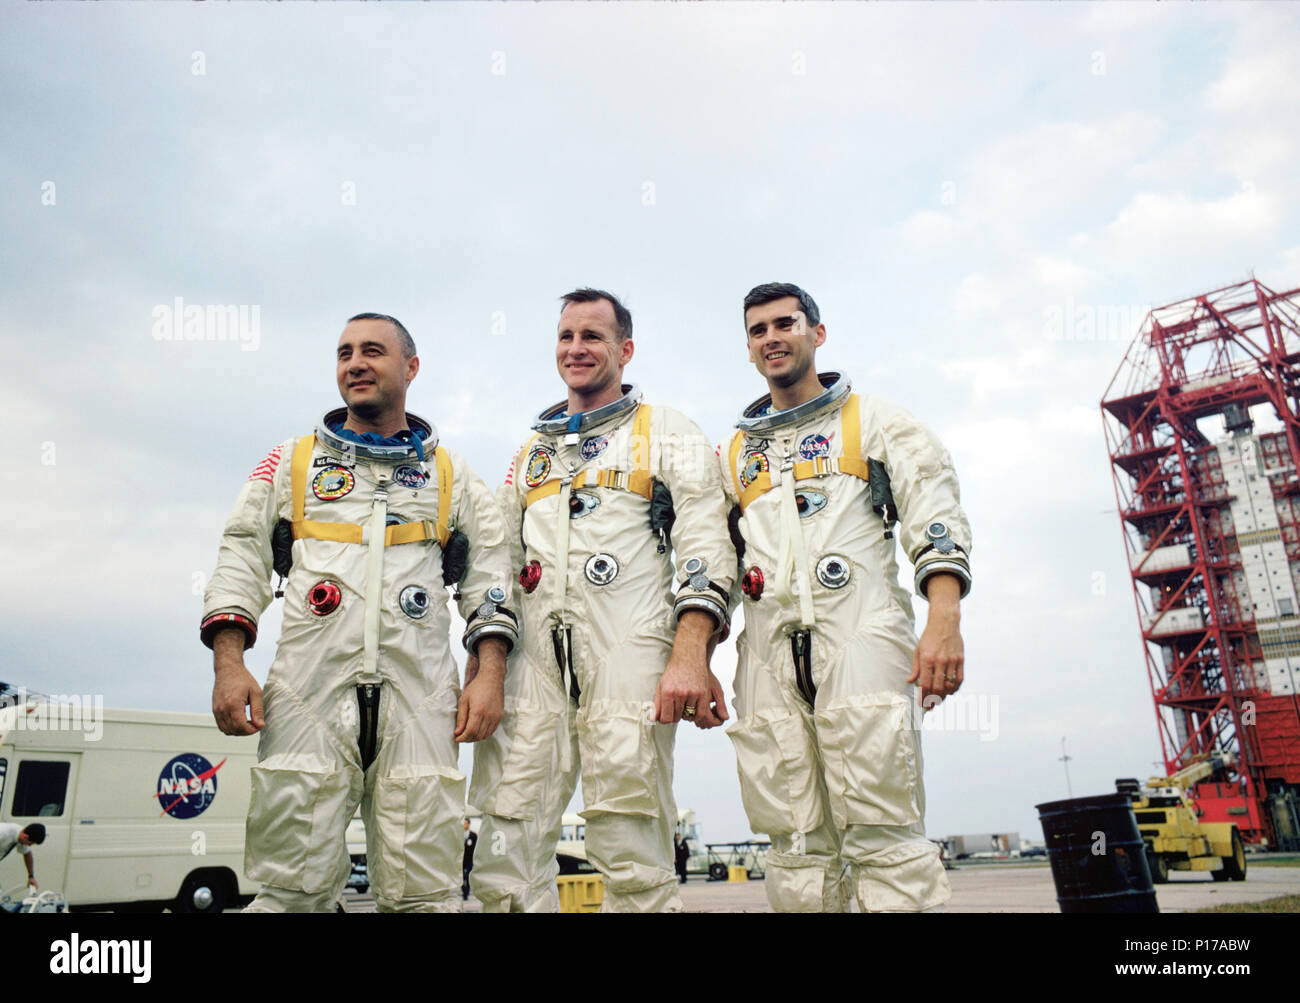 The prime crew of Apollo 1, Virgil I (Gus) Grissom, Edward H. White, II, and Roger B. Chaffee, during training in Florida. On January 27, 1967, the crew was killed when a fire erupted in their capsule during testing. Apollo 1 was originally designated AS- 204 but following the fire, the astronauts’ widows requested that the mission be remembered as Apollo 1 and following missions would be numbered subsequent to the flight that never made it into space. Stock Photo